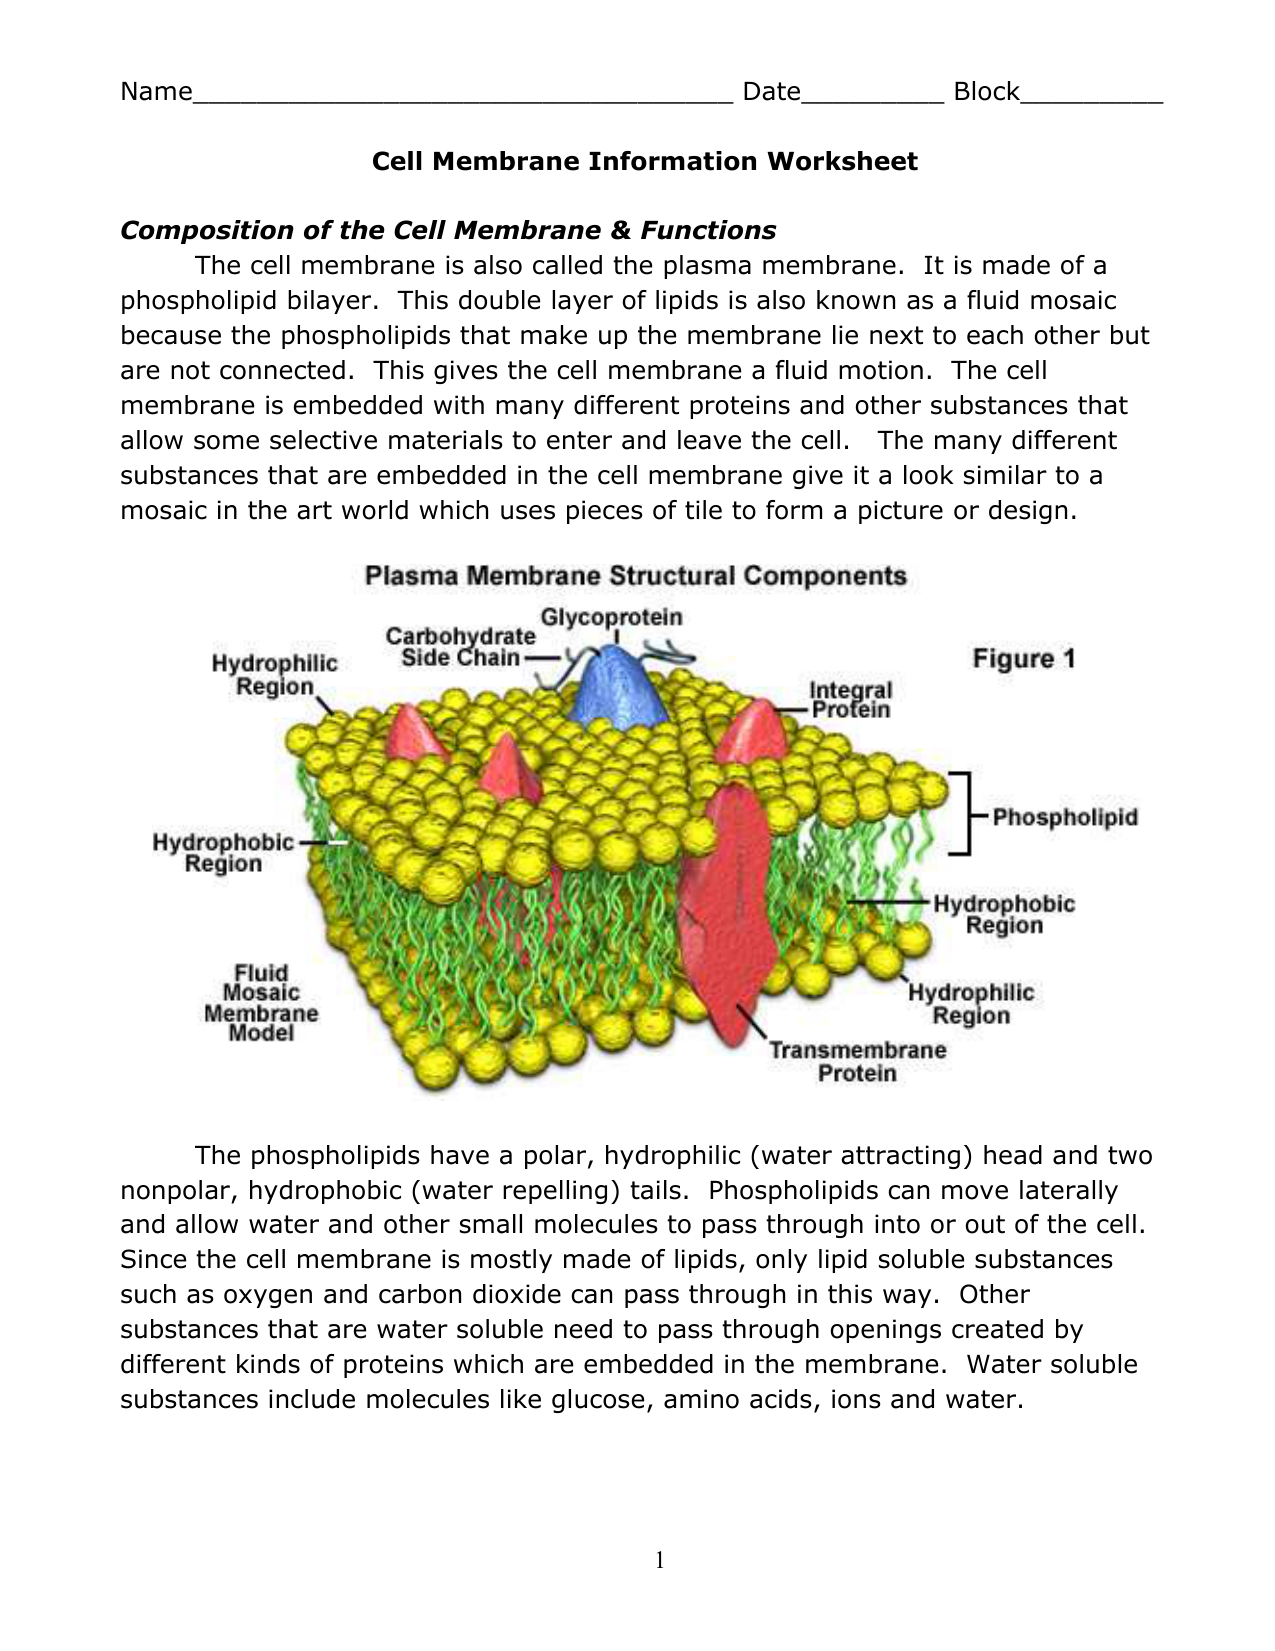 Cell Membrane Information With Cell Membrane Worksheet Answers